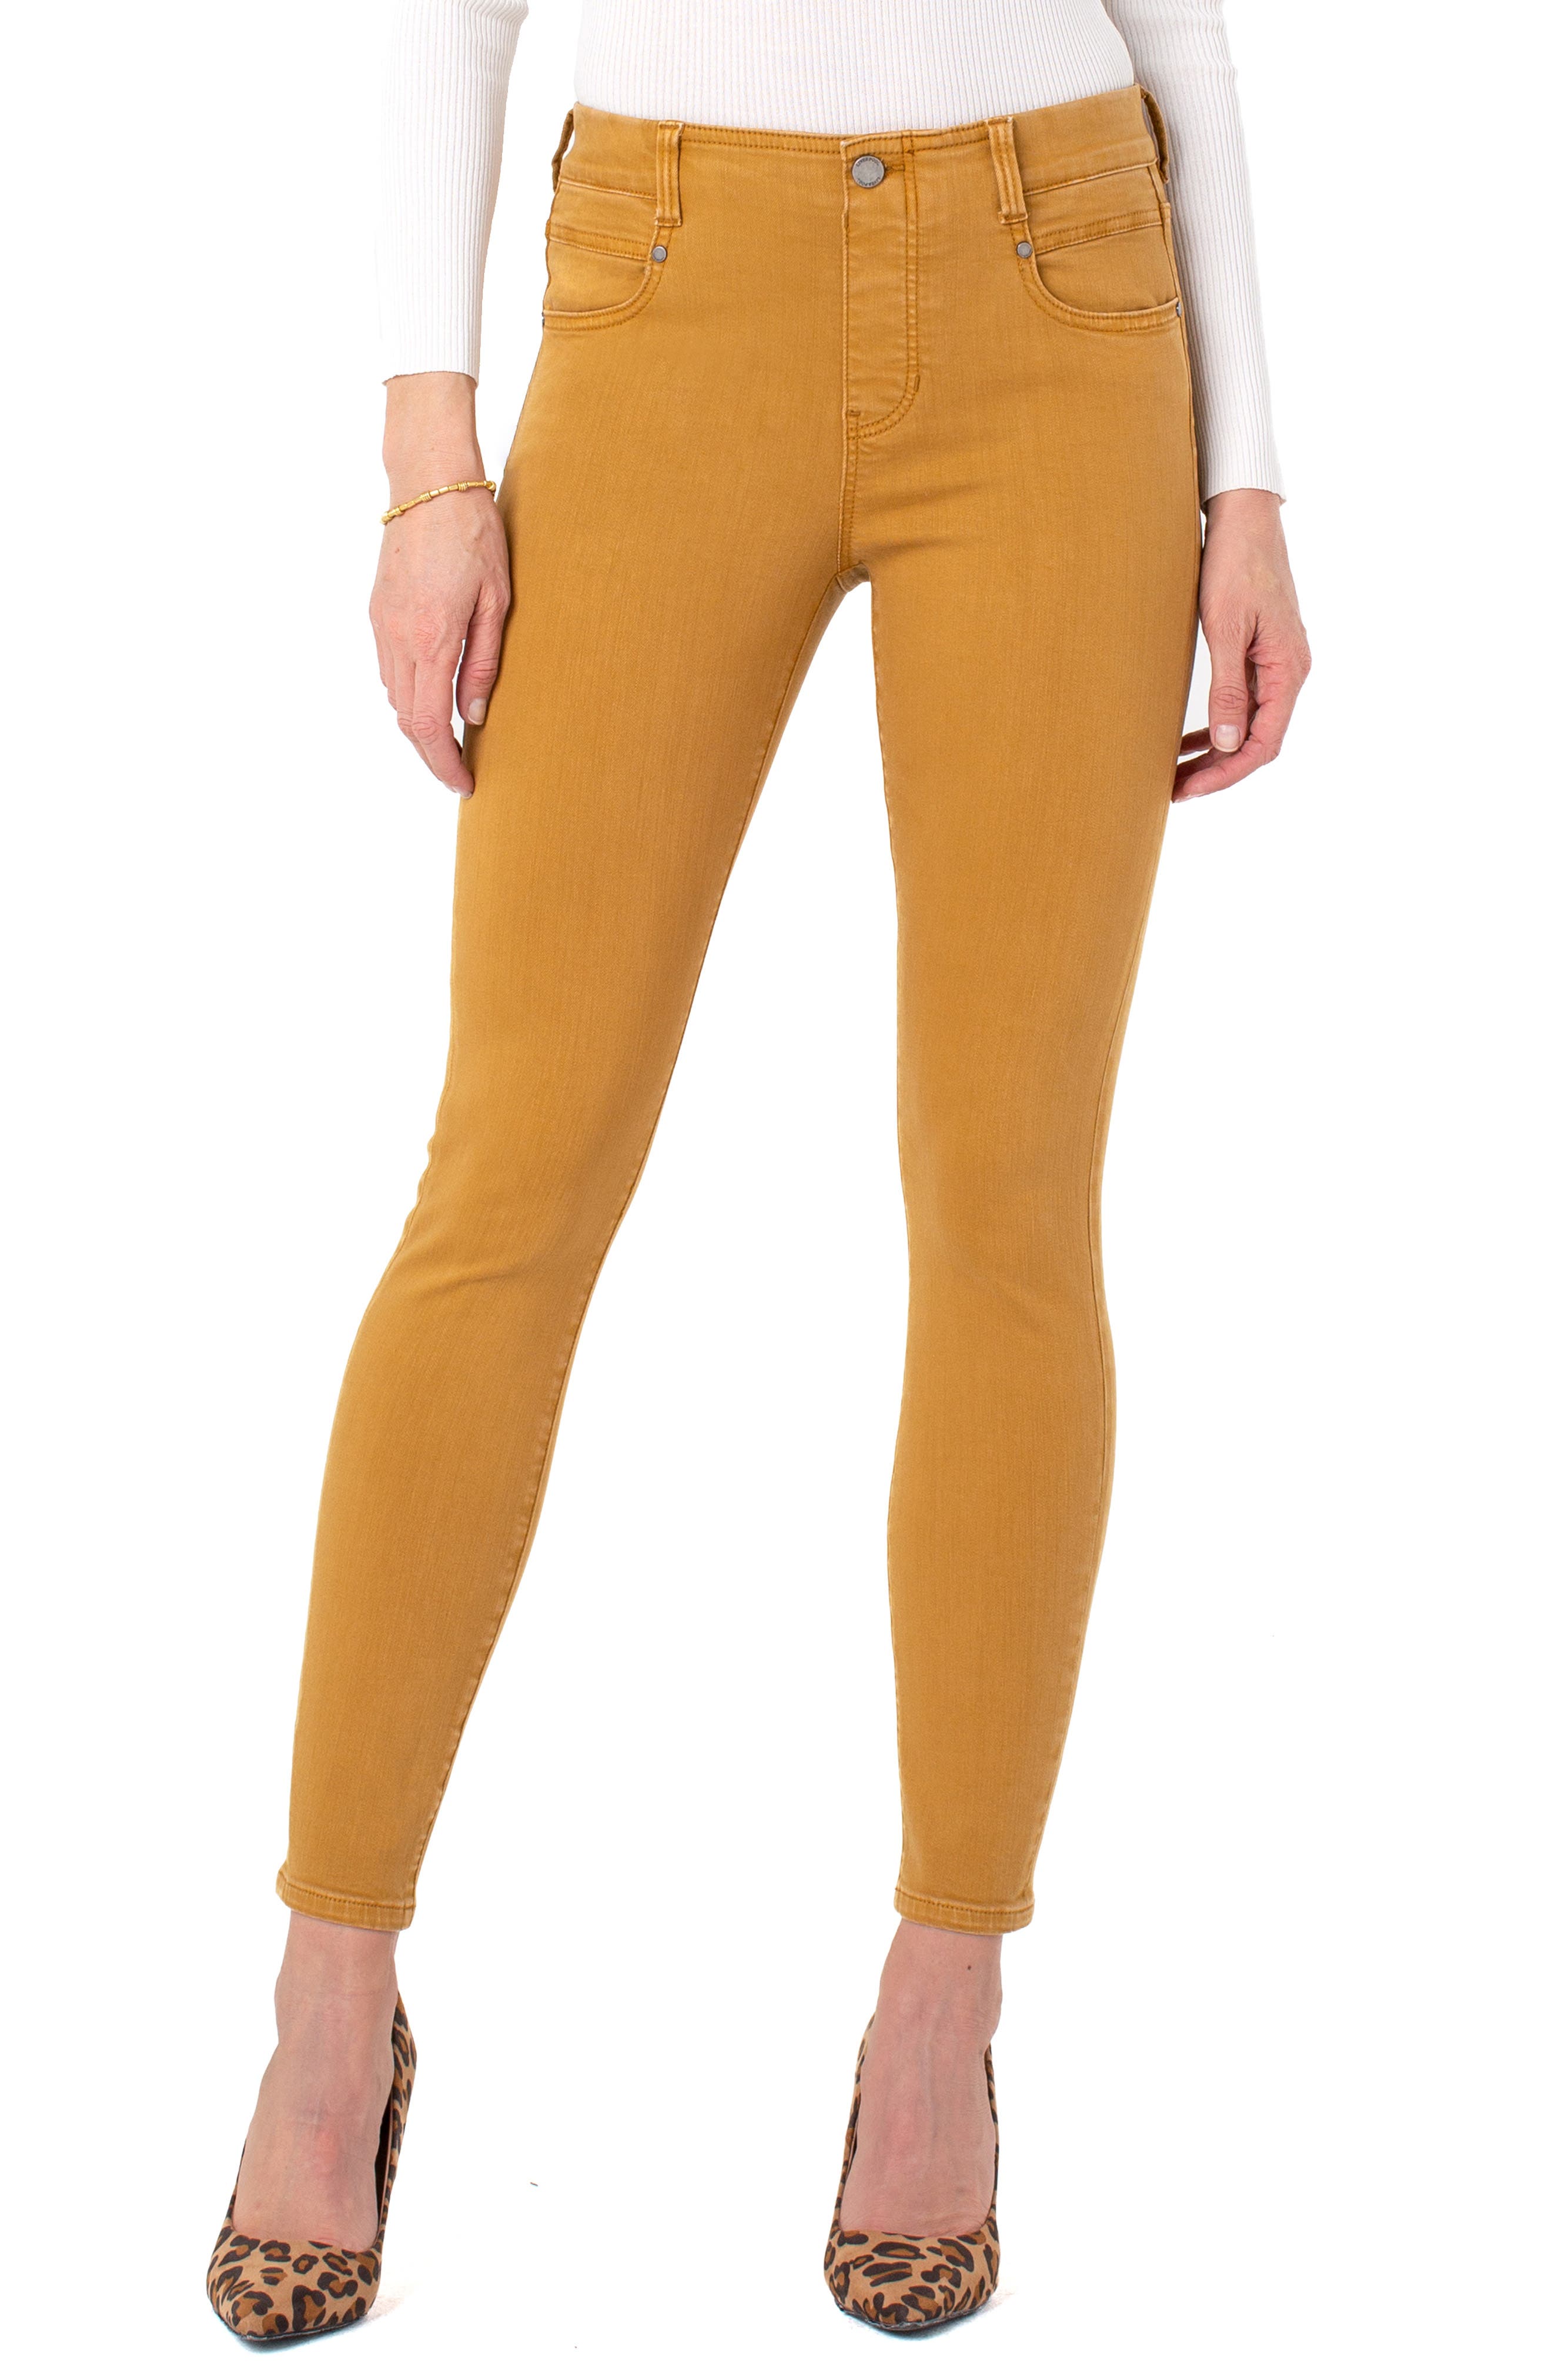 mustard colored skinny jeans